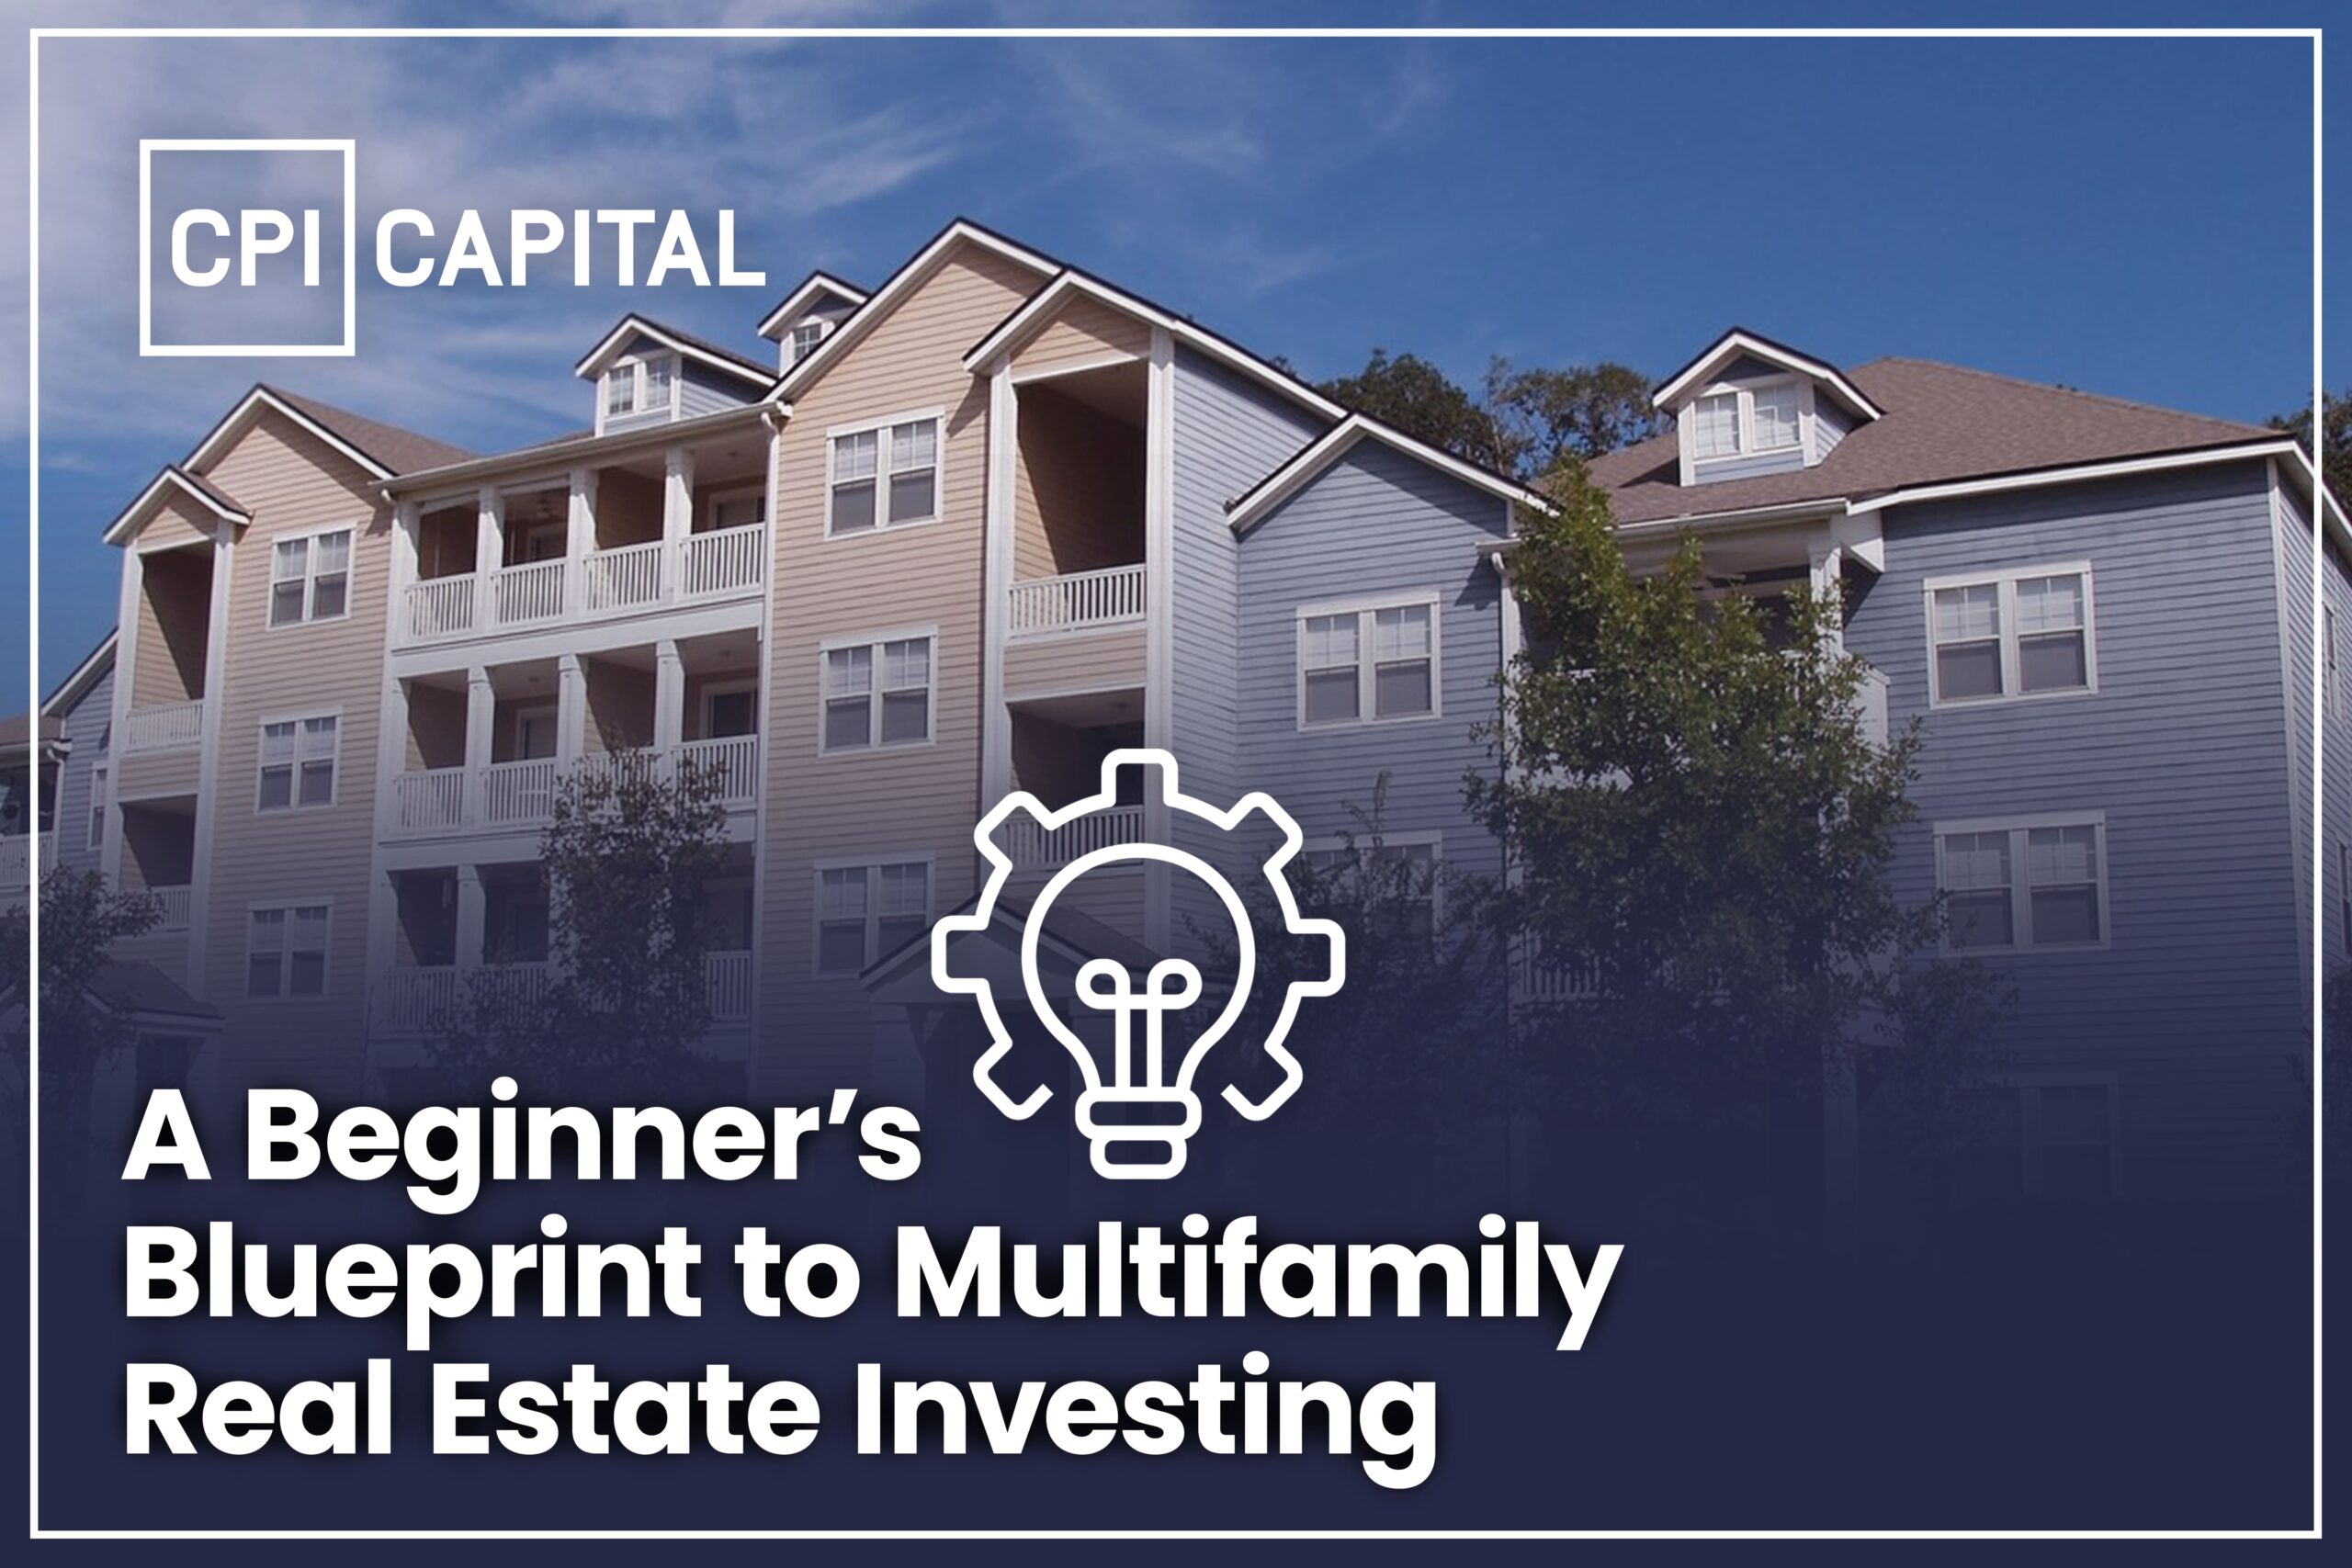 A Beginner’s Blueprint to Multifamily Real Estate Investing